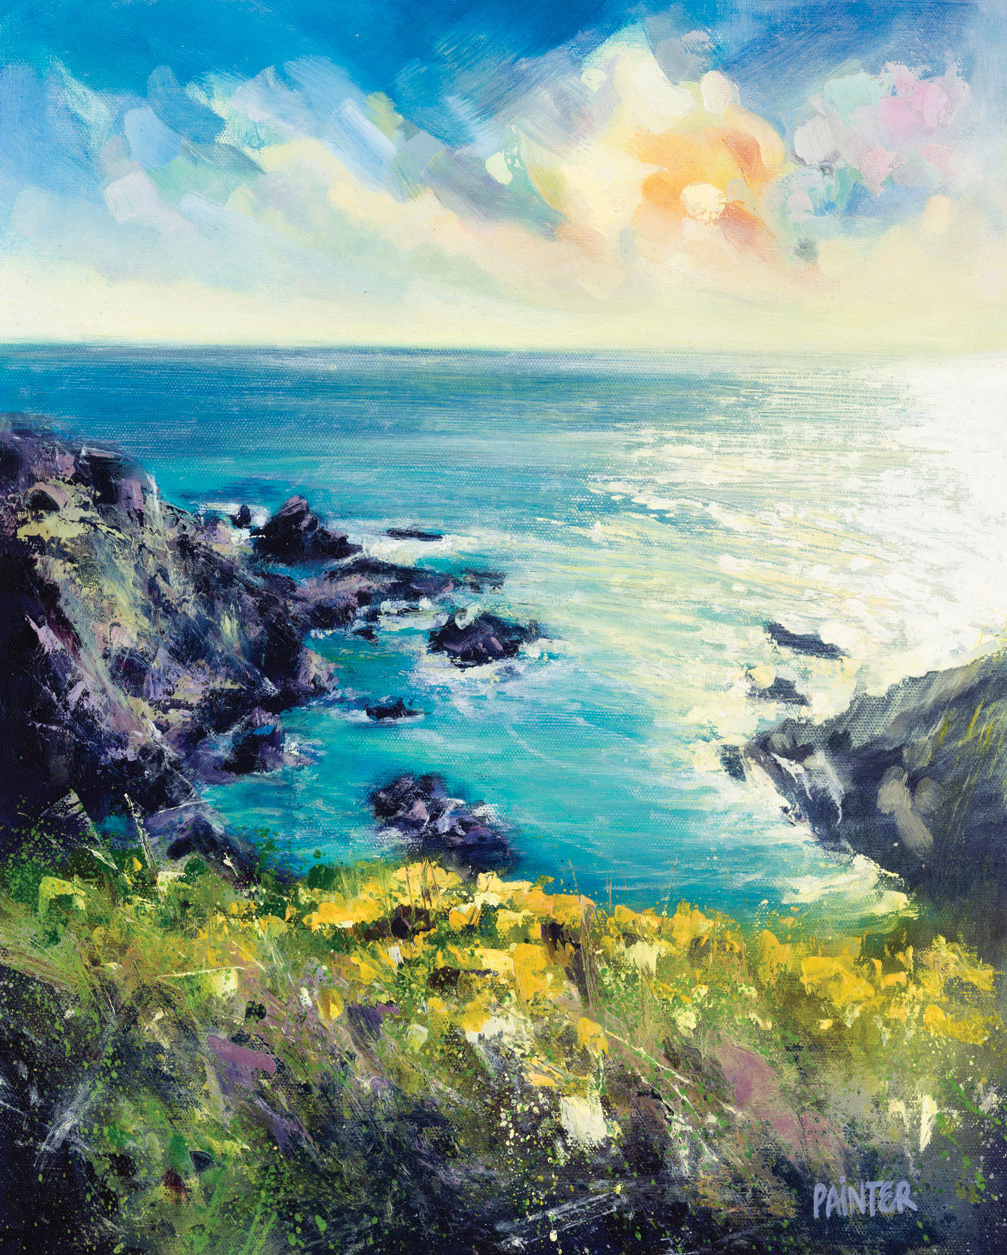 Rachel-Painter---Paintings-of-Sunsets-Over-Water---Paintings-Of-The-Sea---Original-Art-For-Sale---Paintings-Of-Cornwall---Impressionistic-Landscape-Paintings---Wild-&-Free.jpg